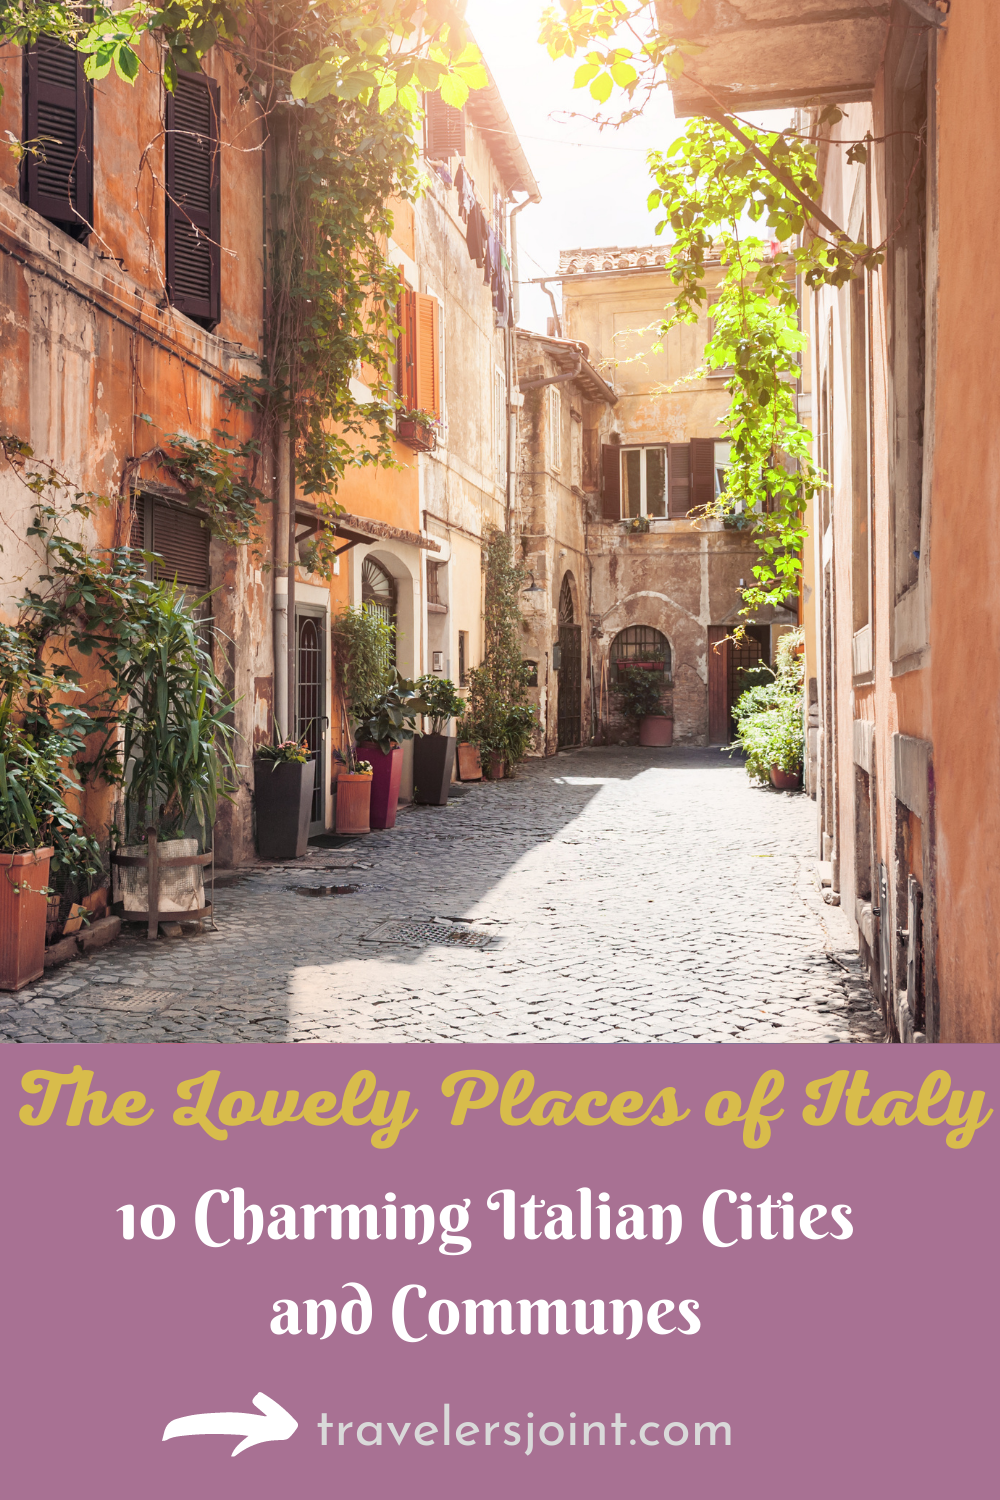 The Lovely Places of Italy - 10 Charming Cities and Communes